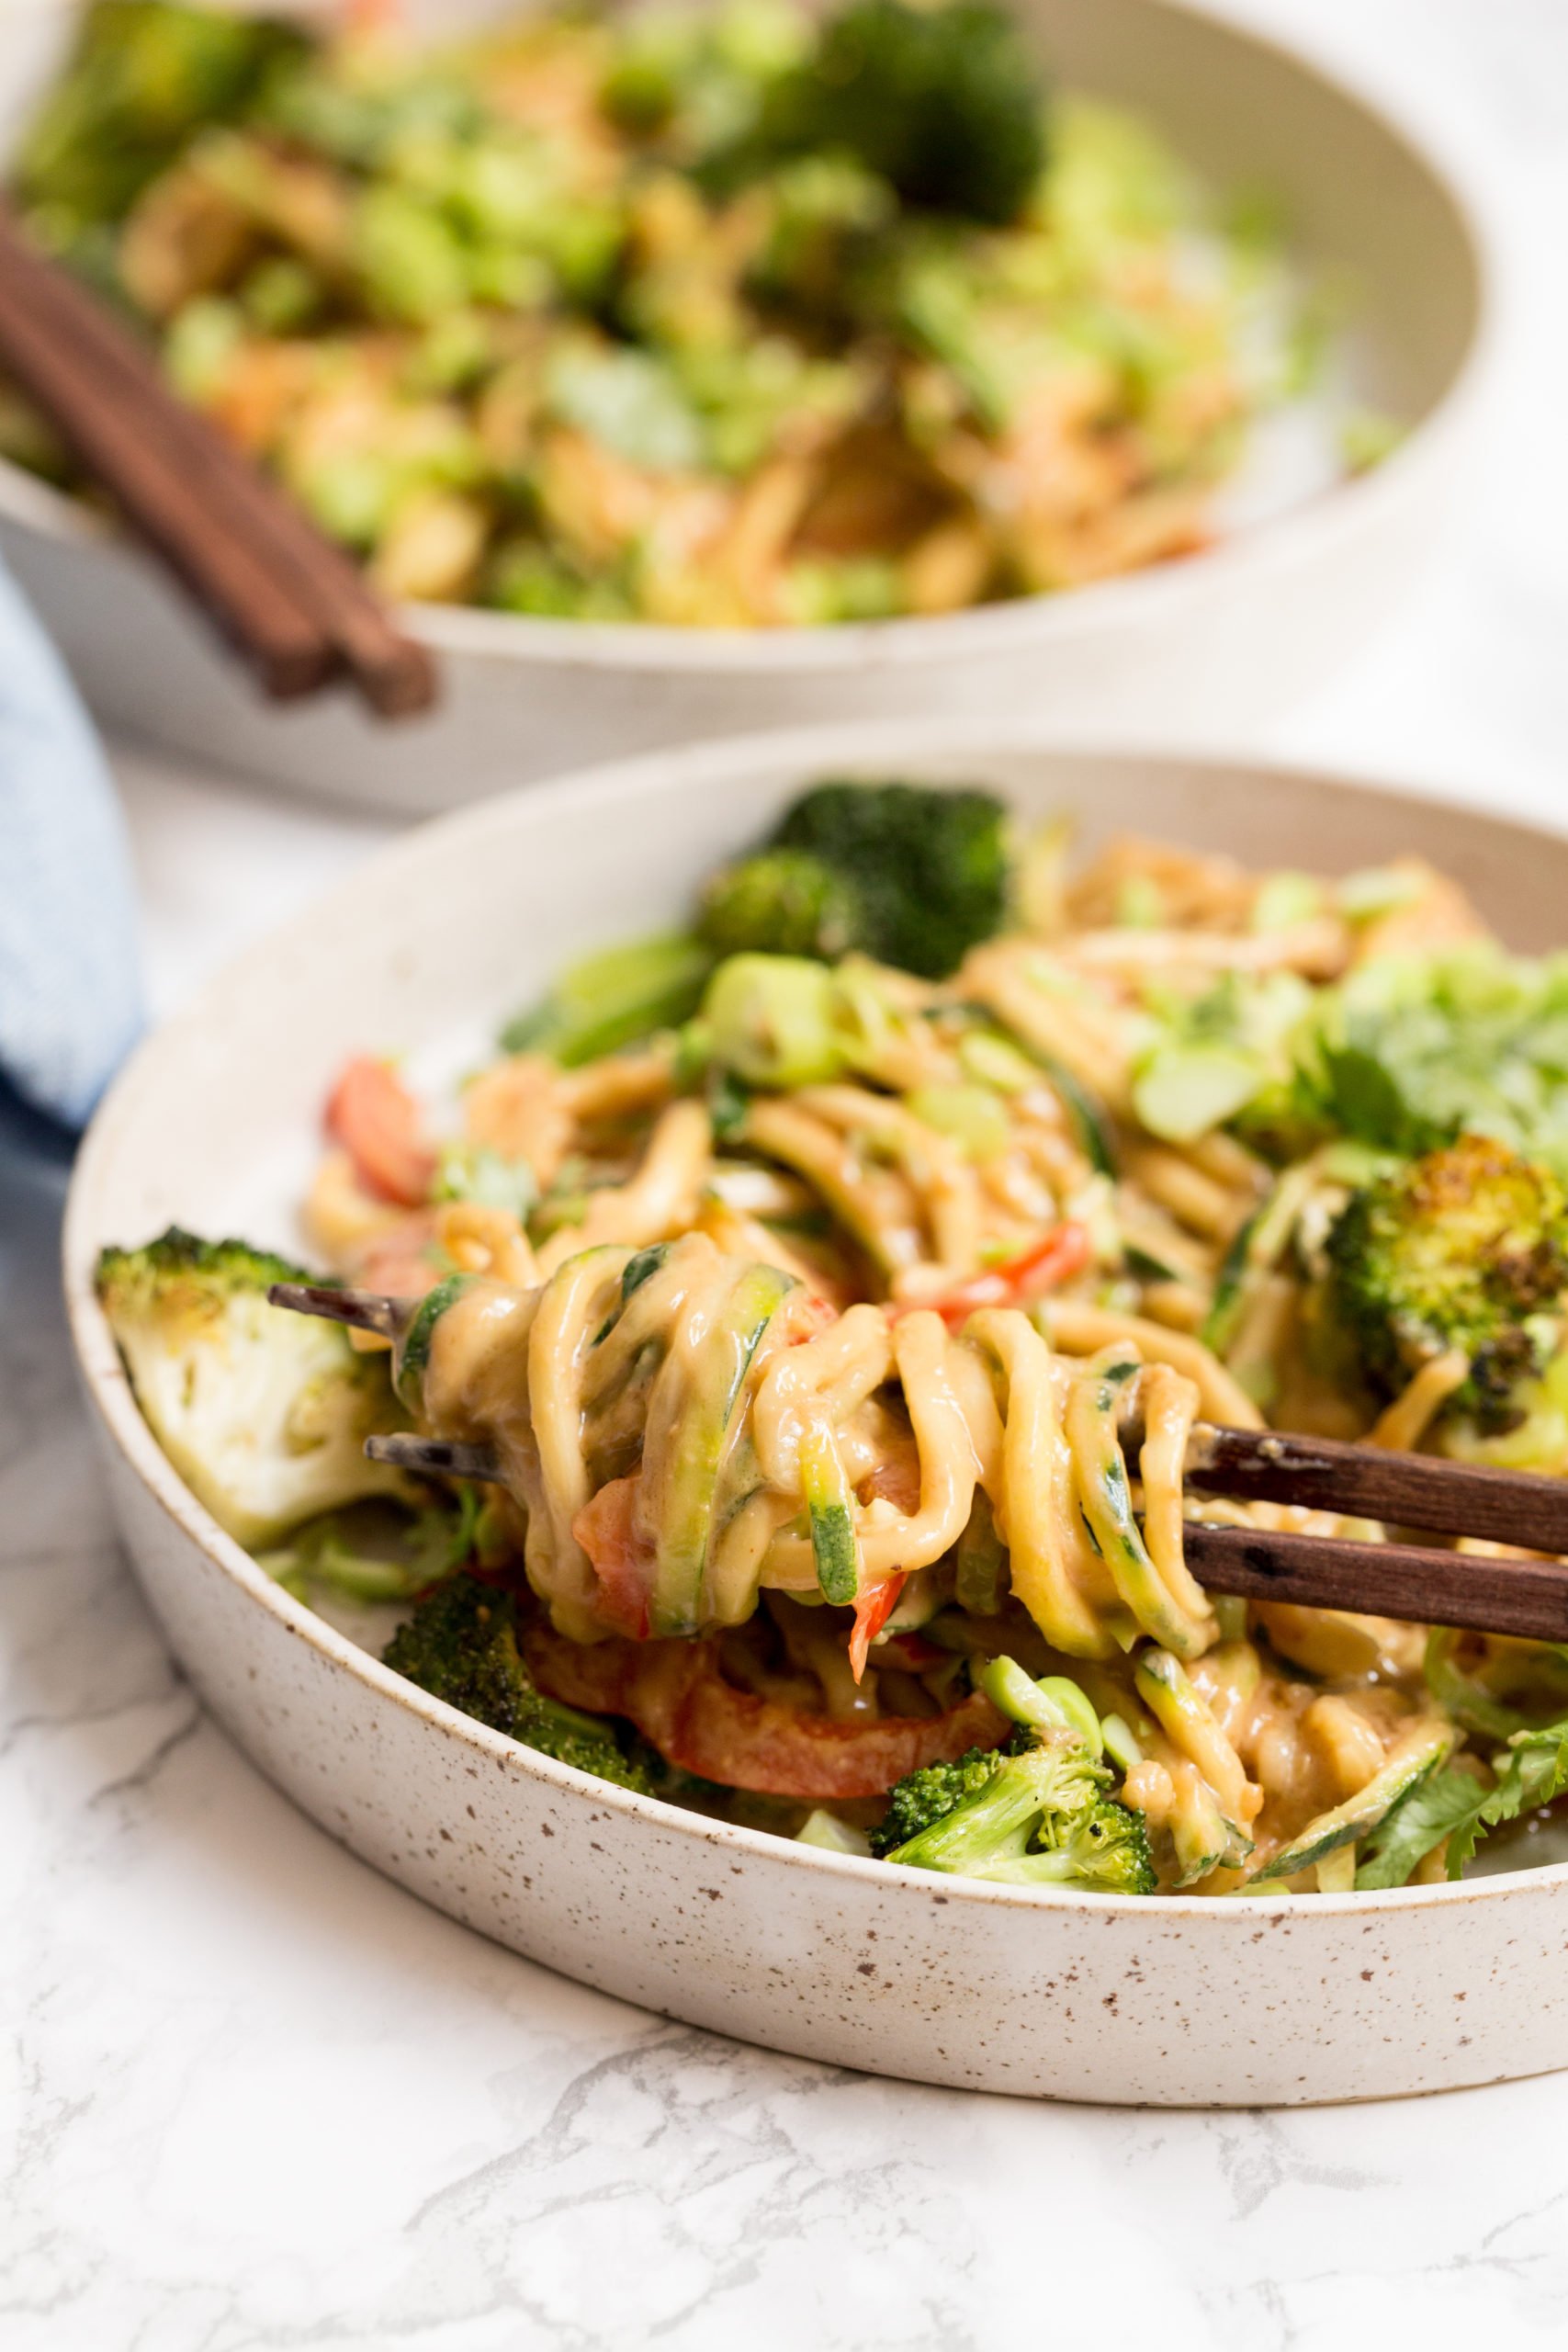 Peanut Zoodles with Grilled Broccoli